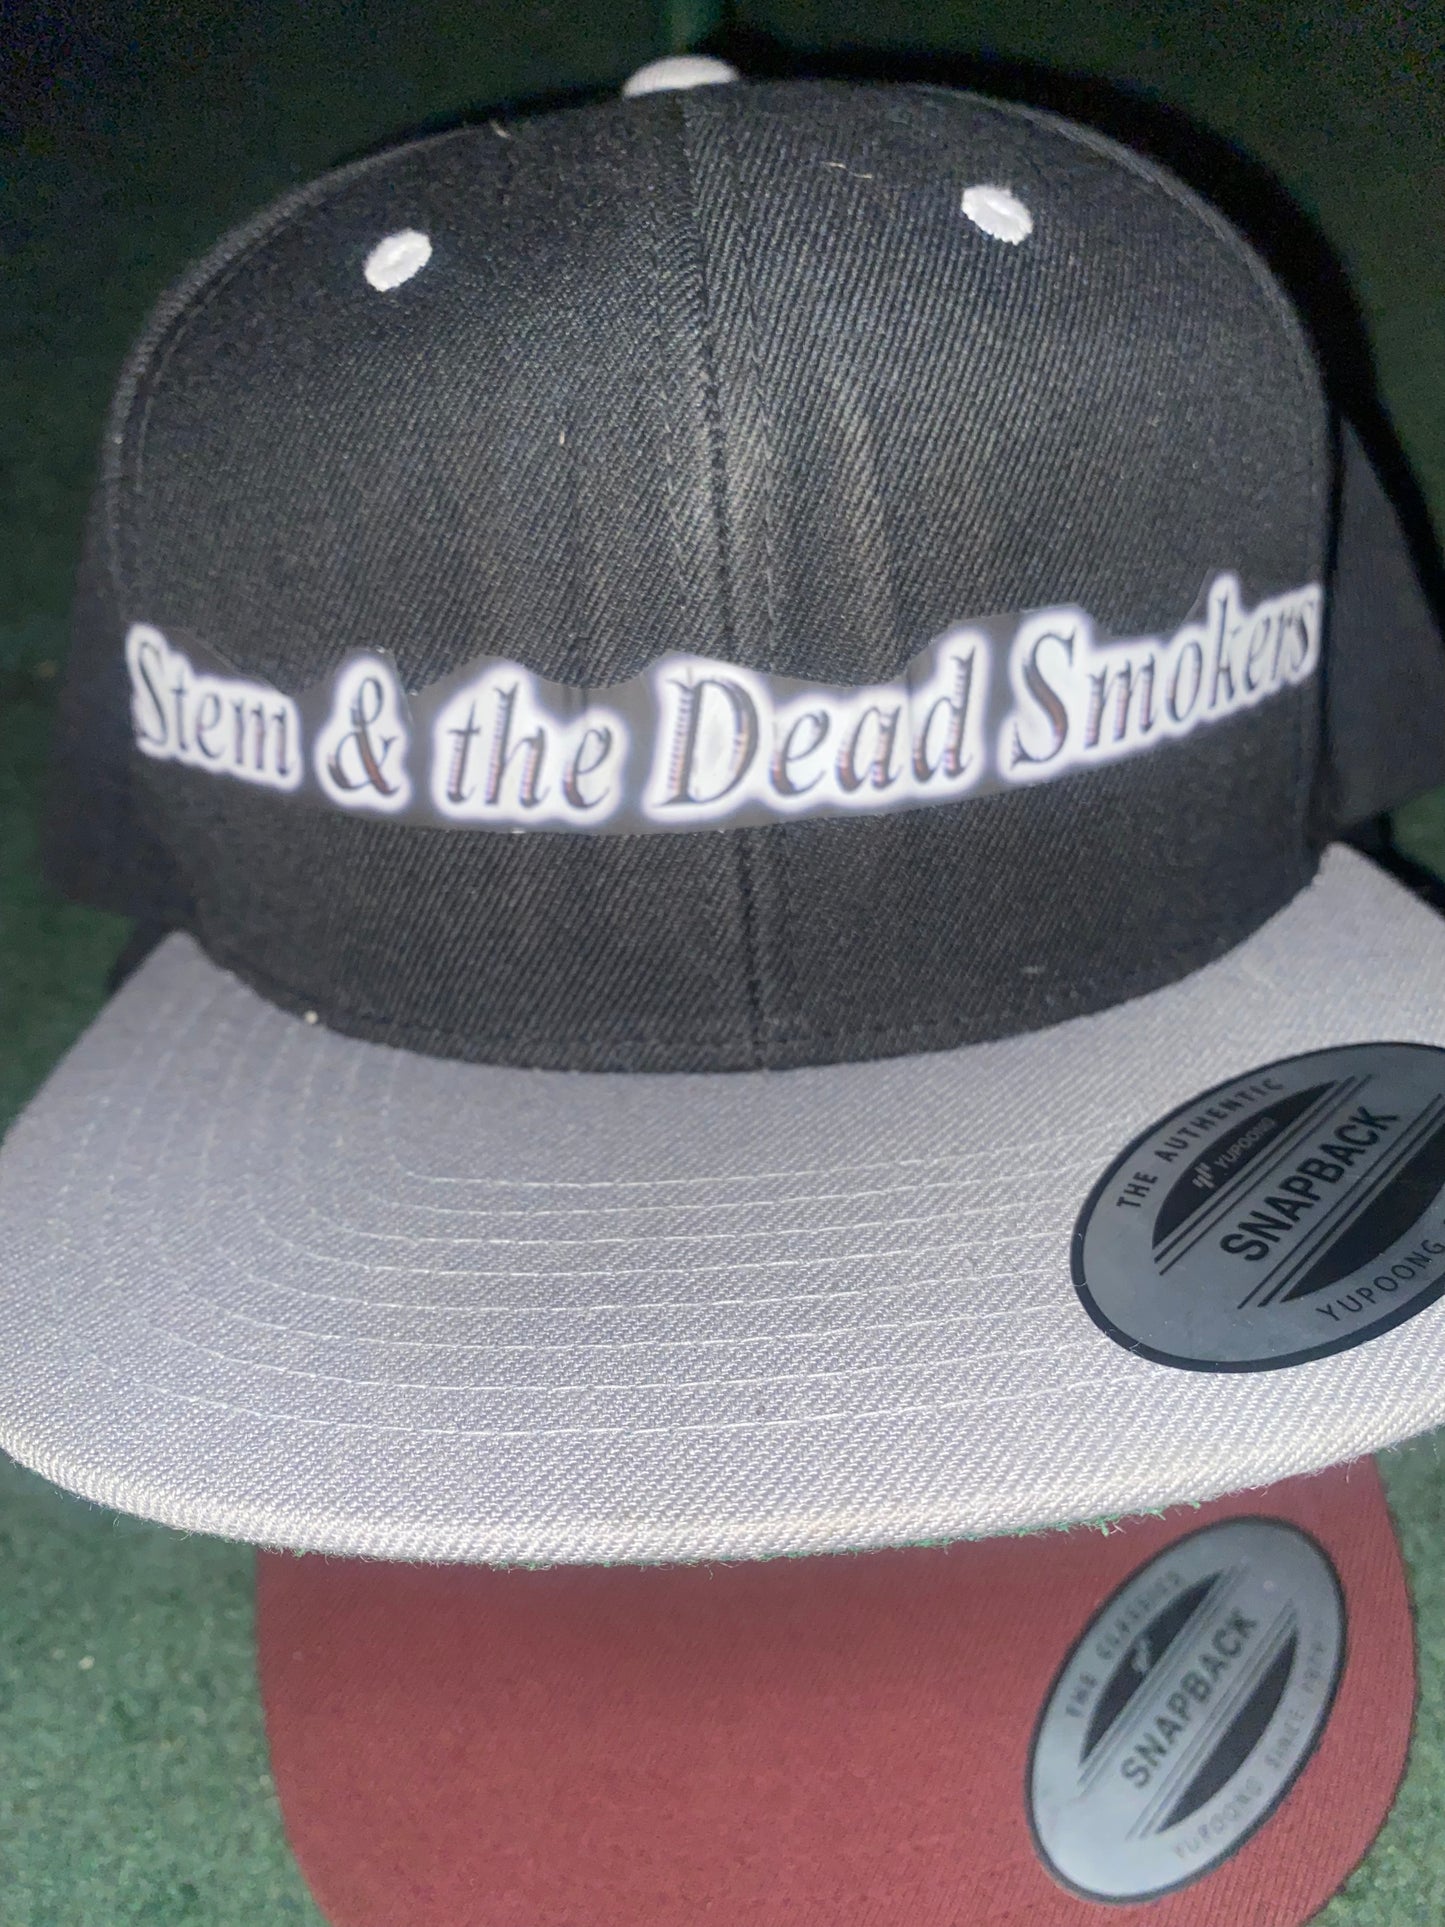 Stem & the Dead Smokers Themed Hats